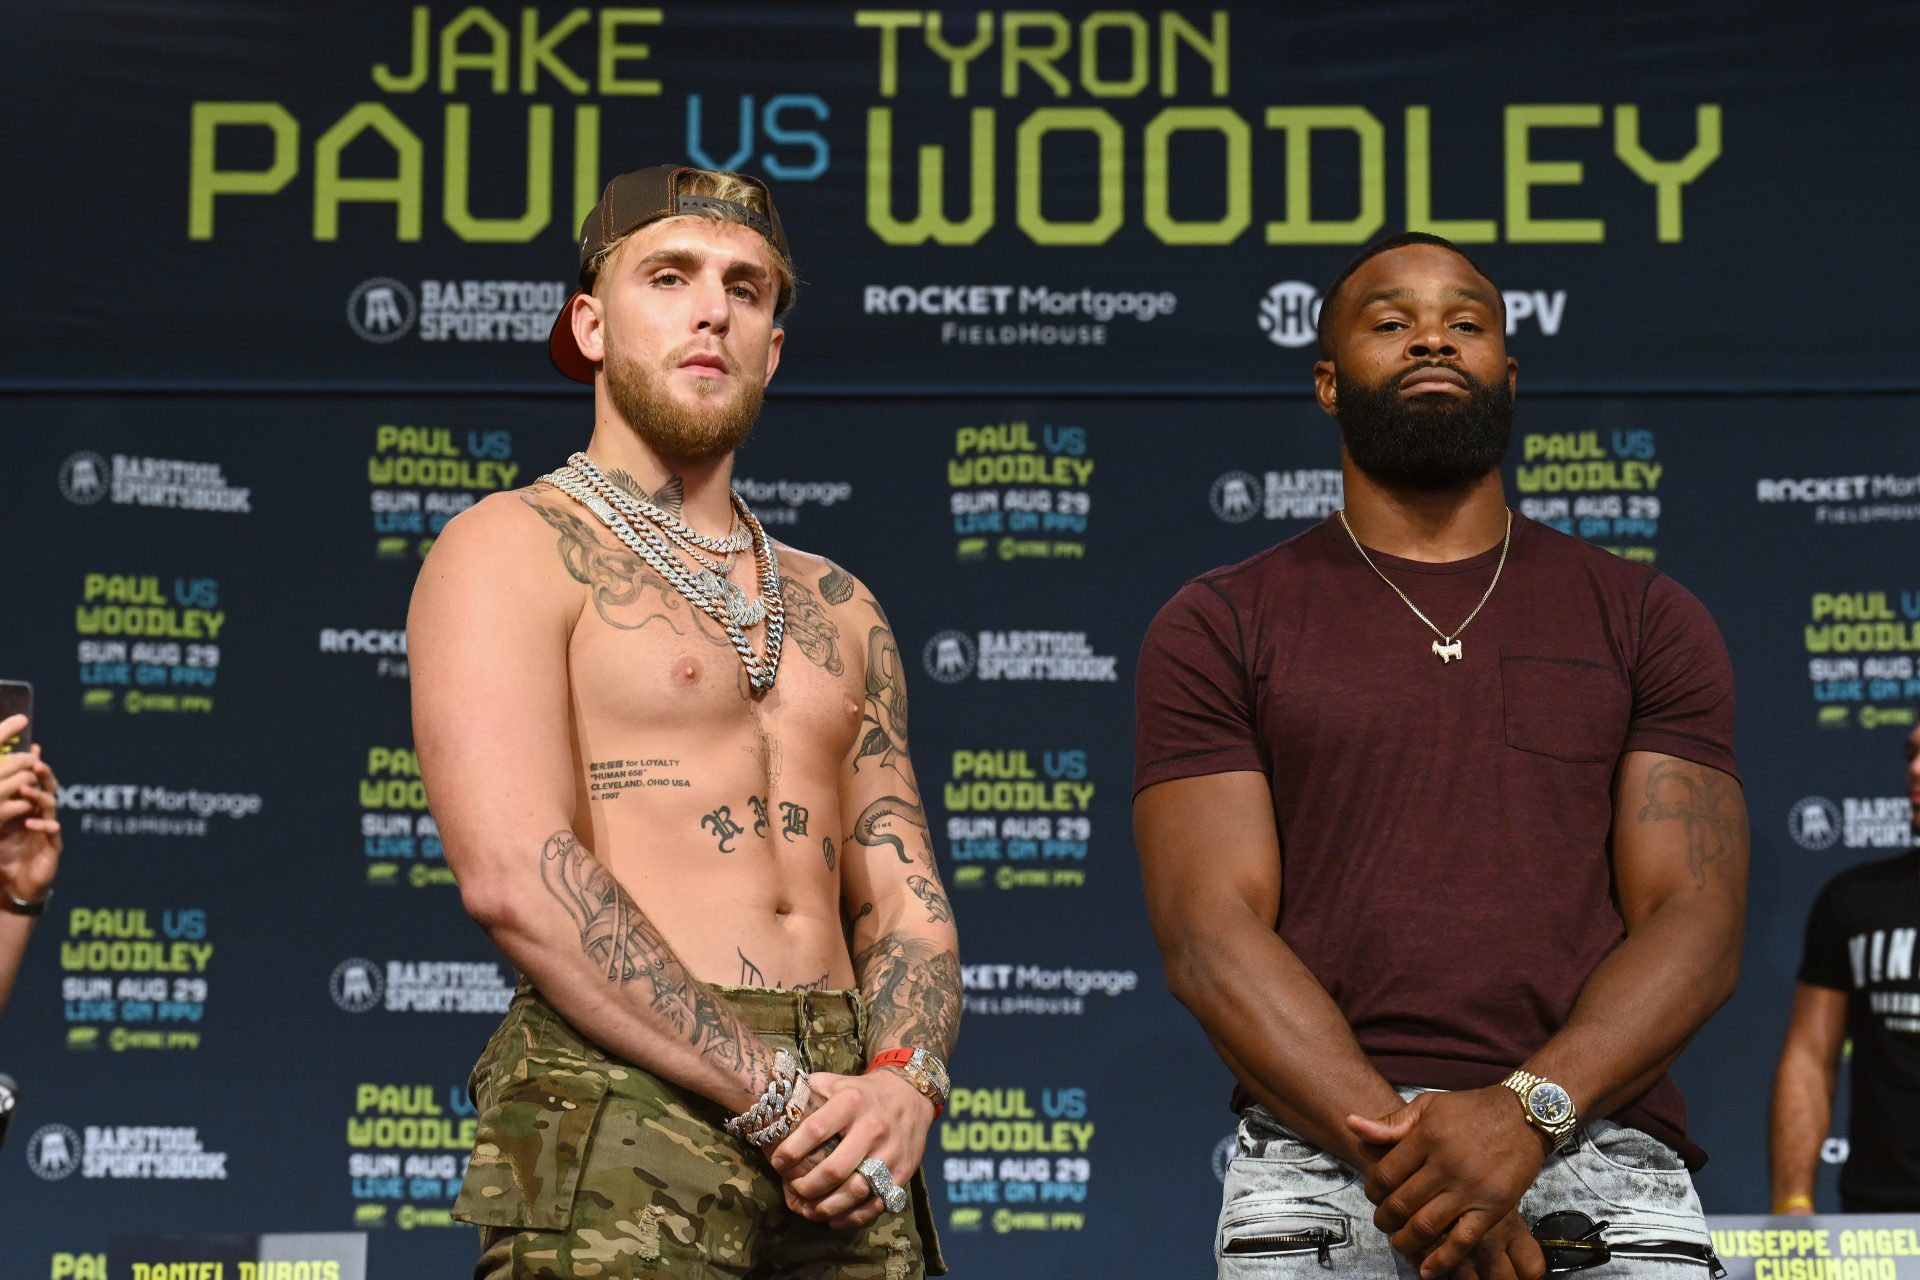 Jake Paul Says ‘It is Extra Personal’ with Tyron Woodley After Groups Scuffle at Presser